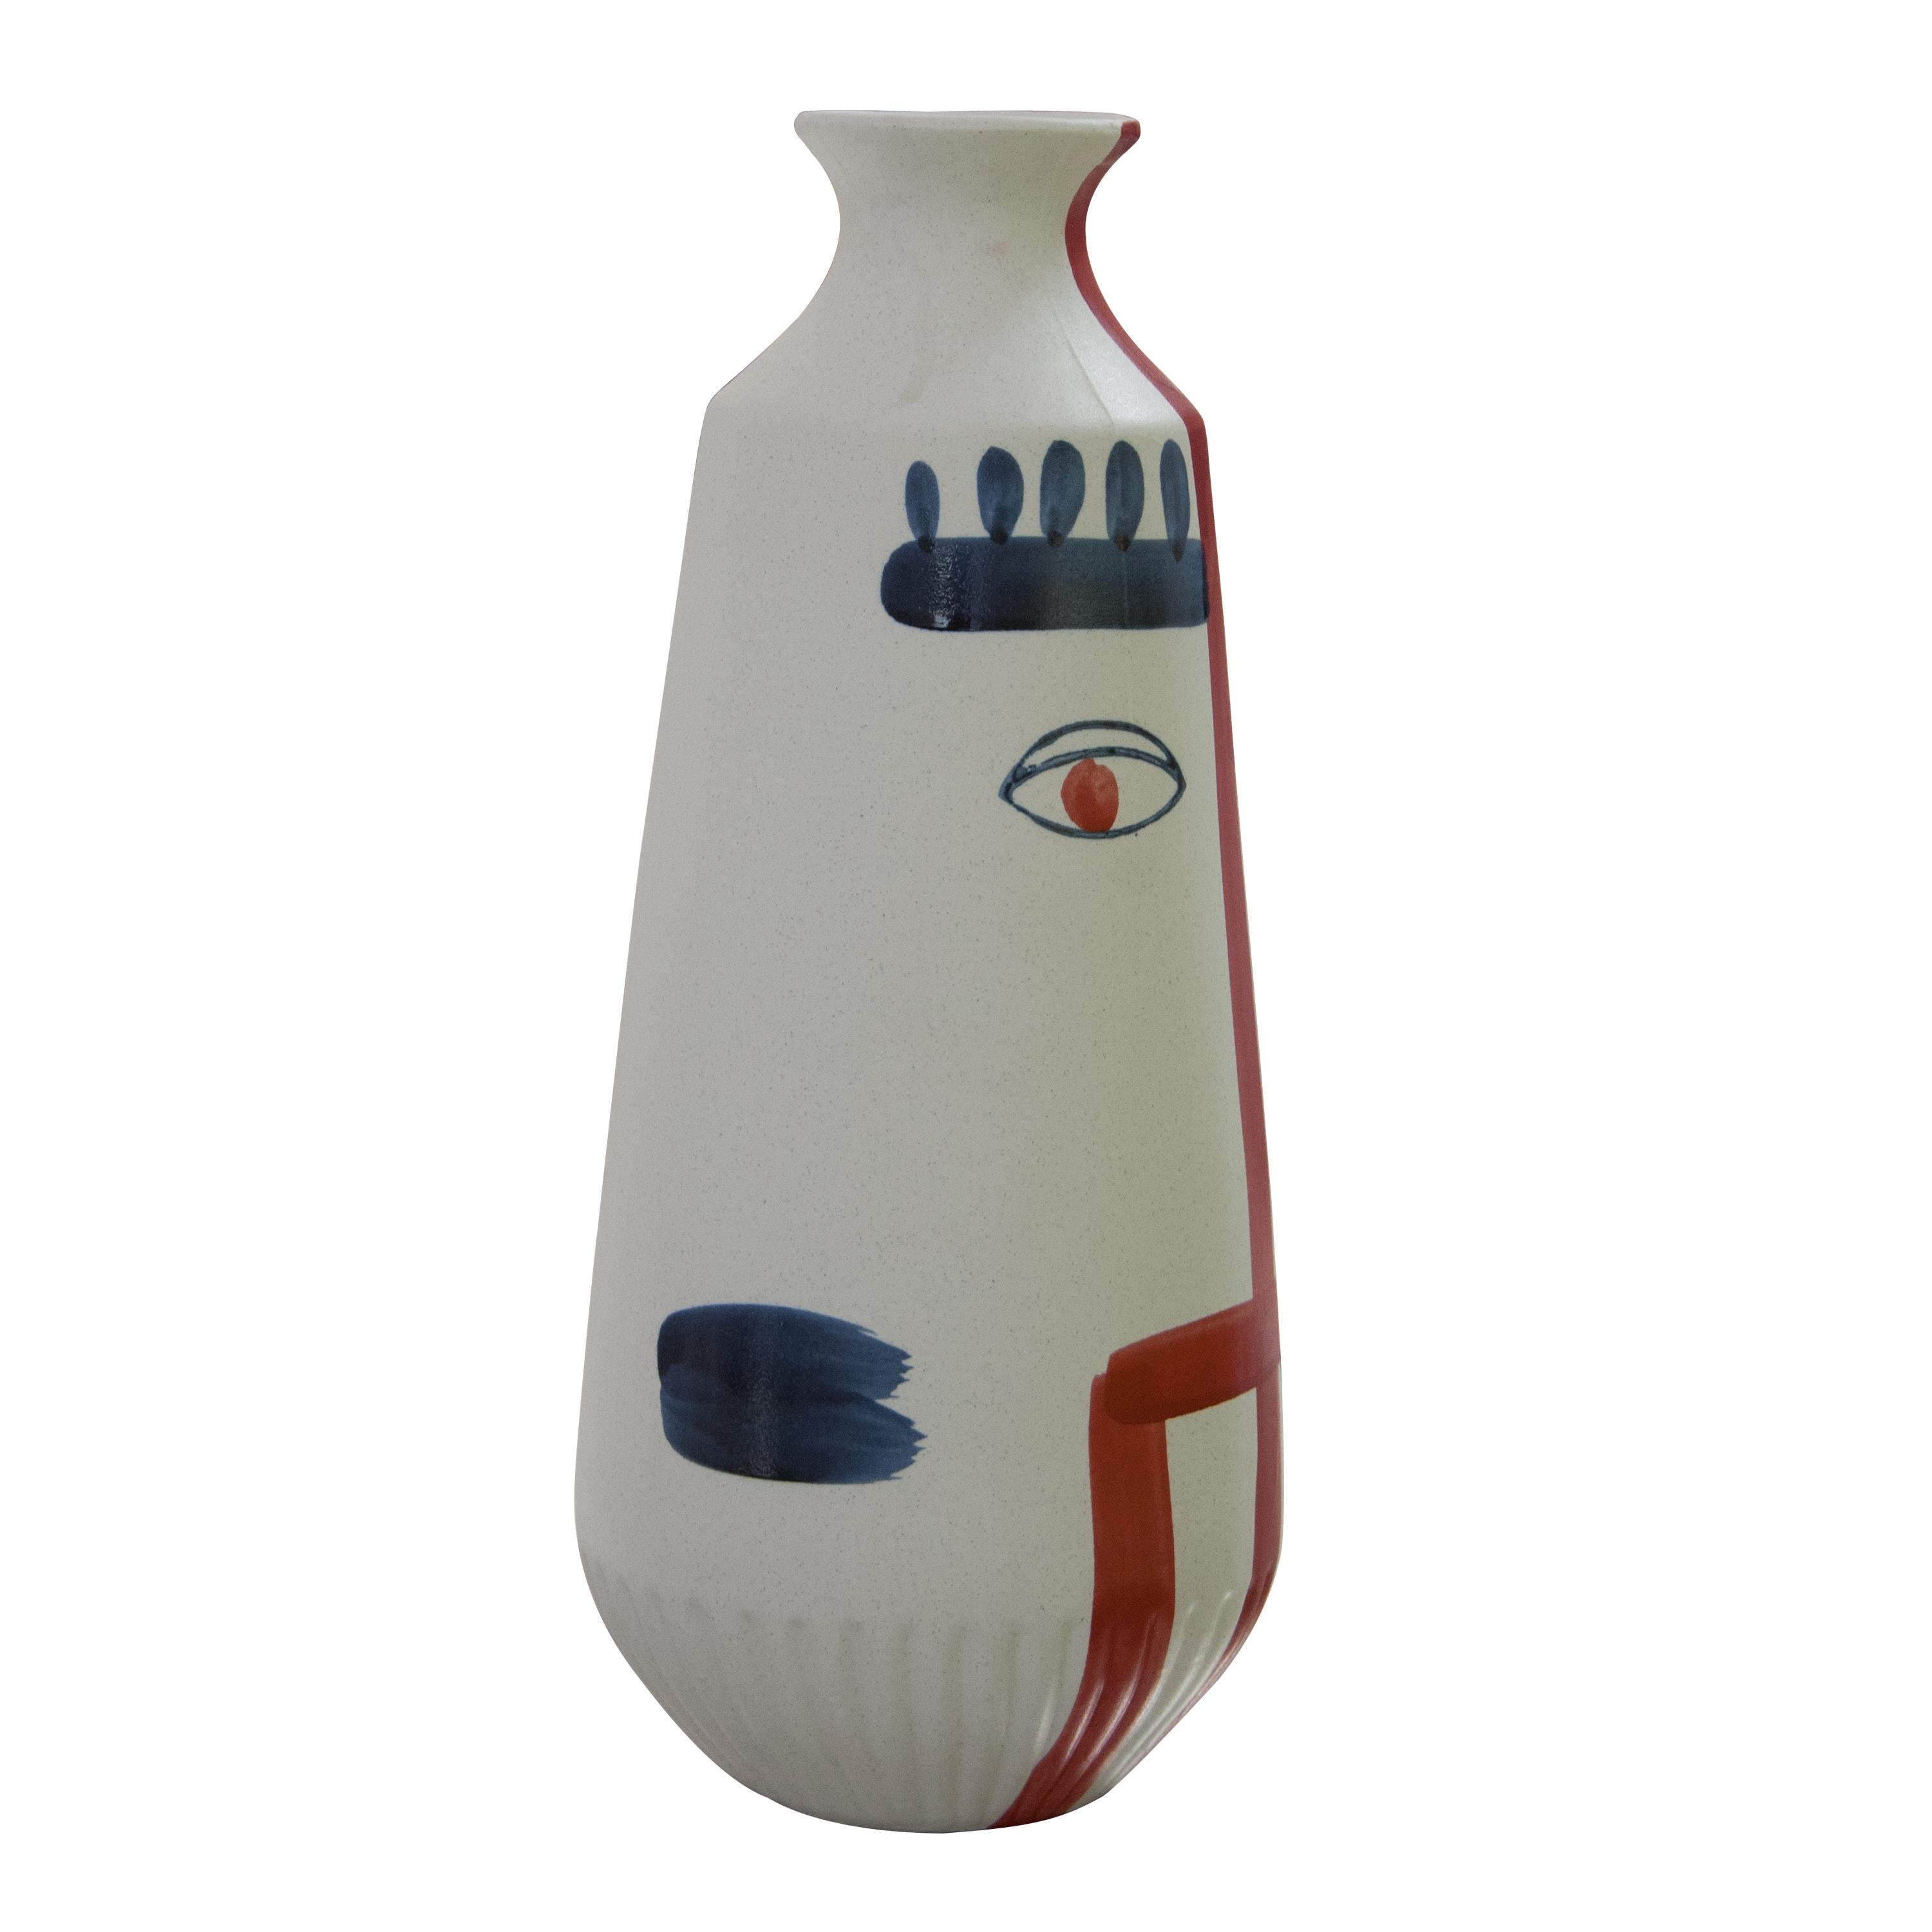 White terracotta vase with hand-painted embellishment.